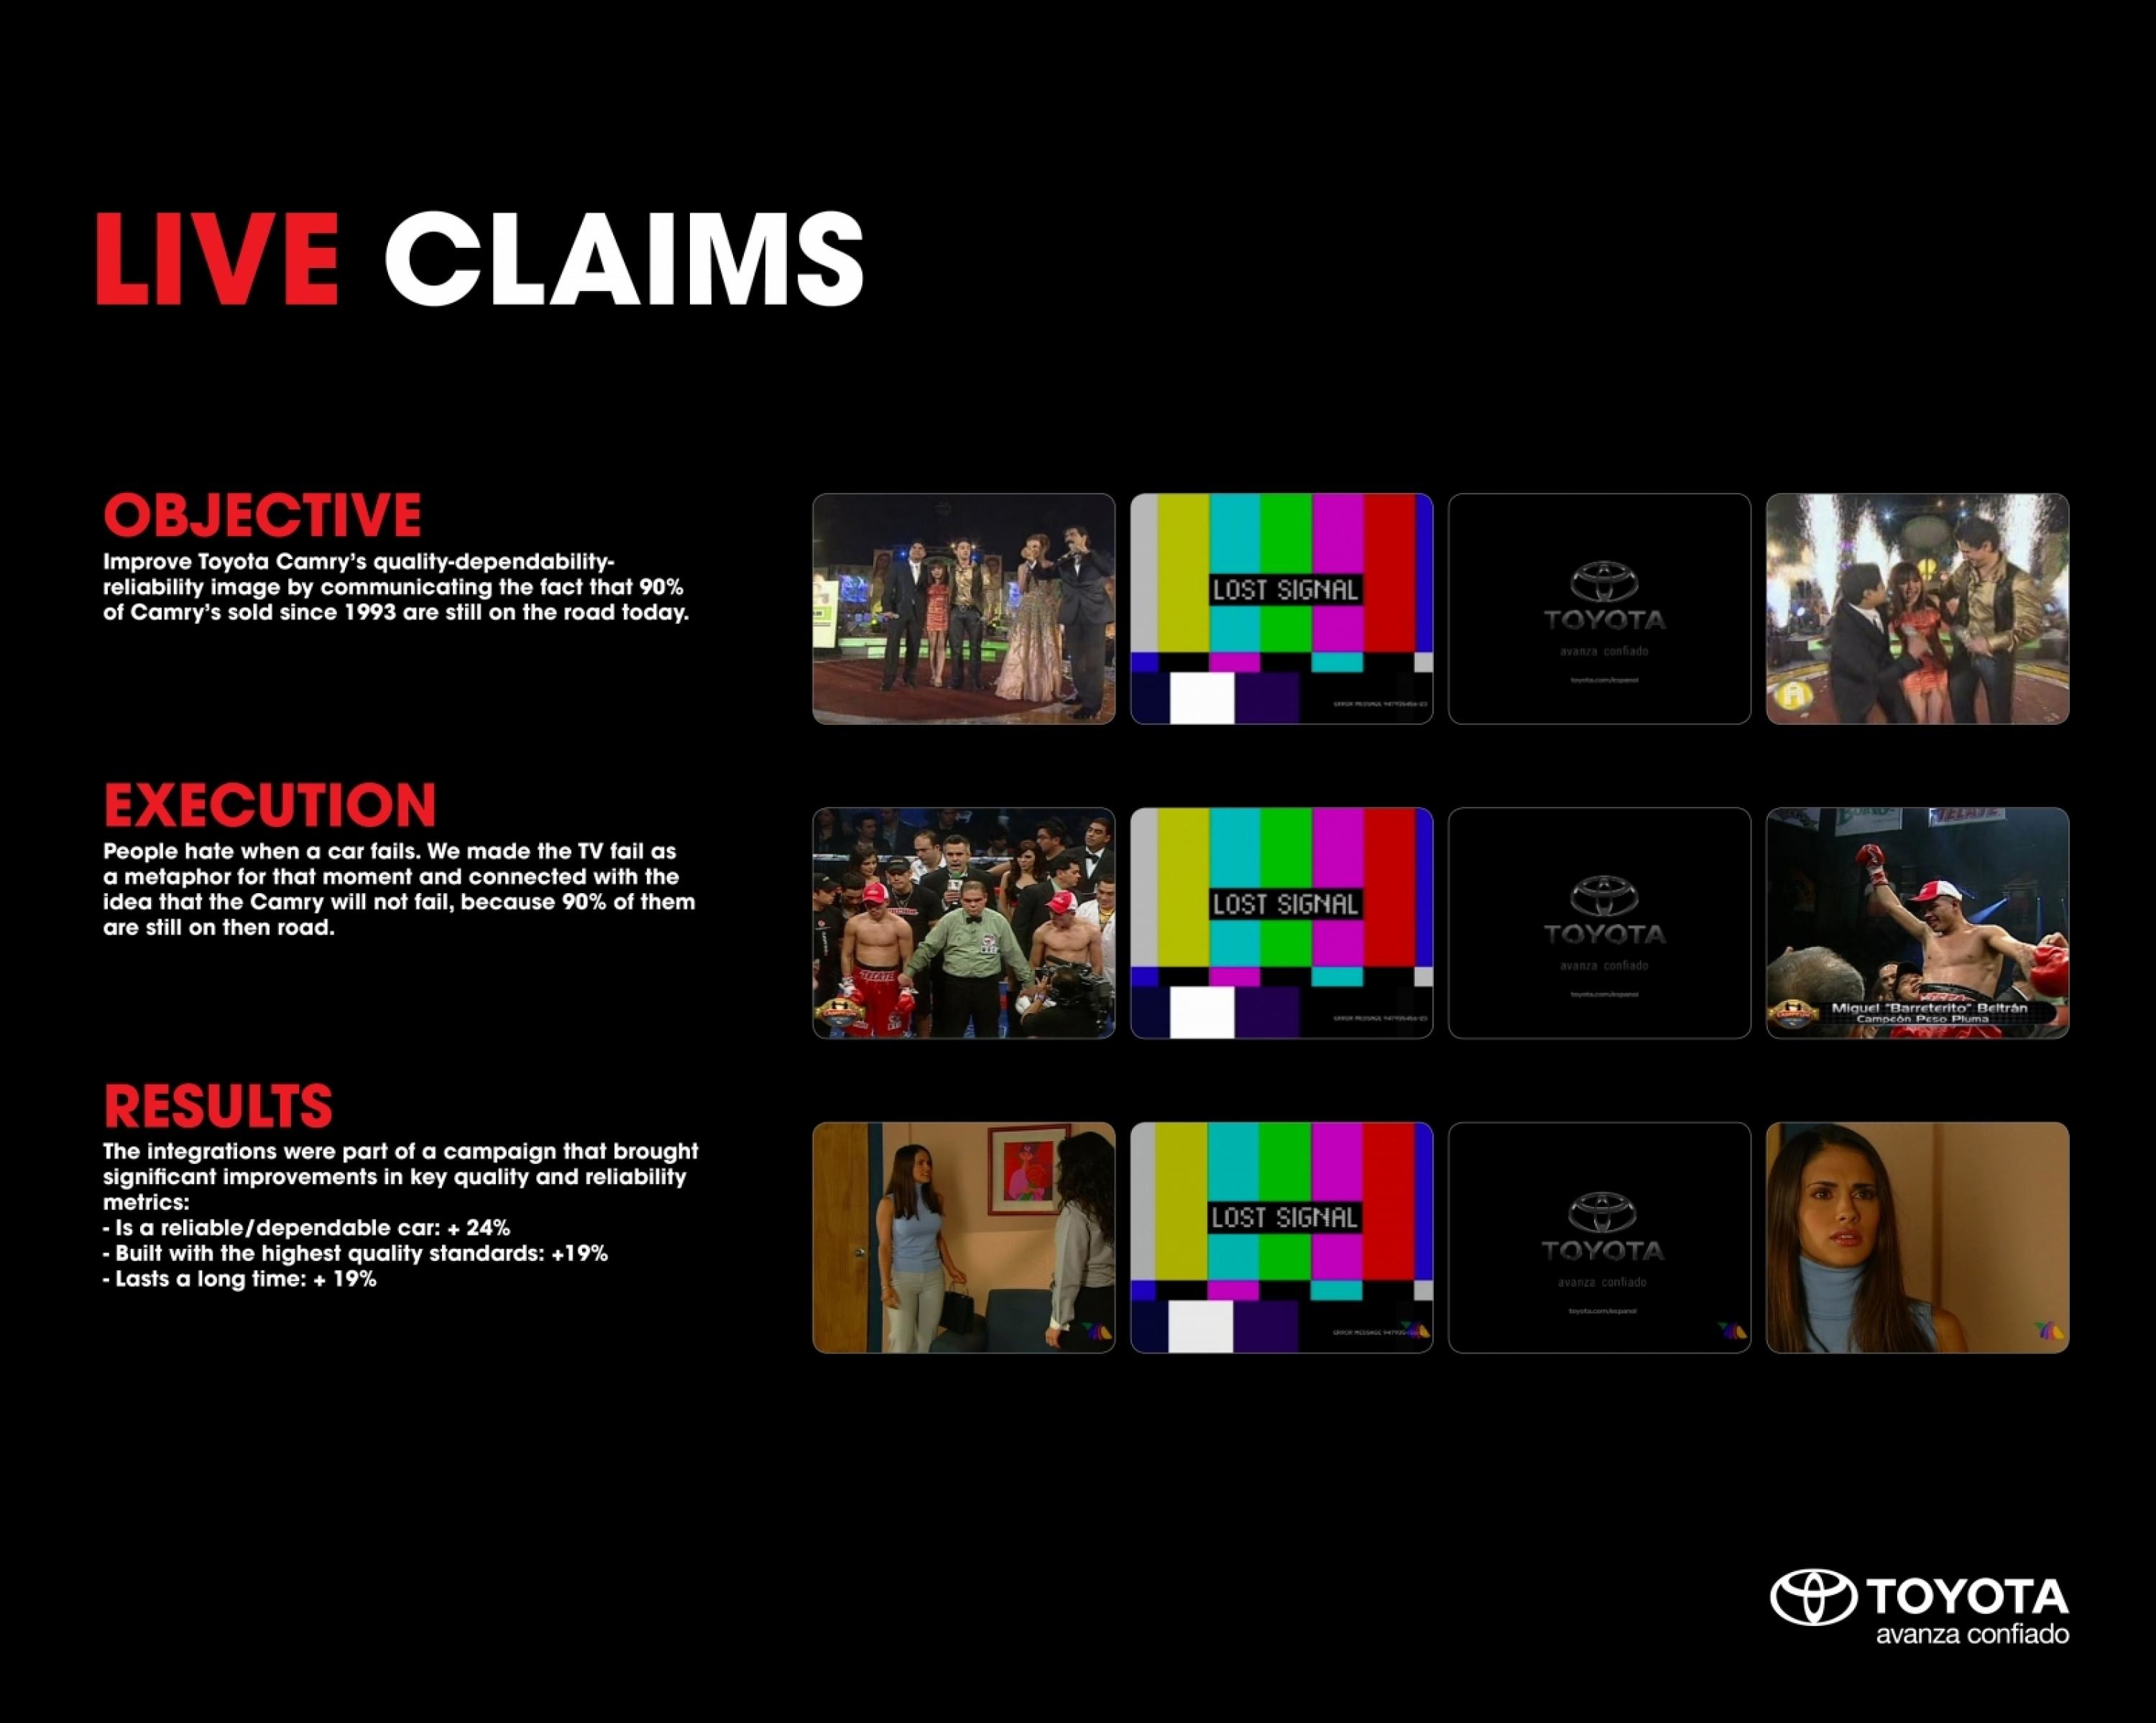 LIVE CLAIMS